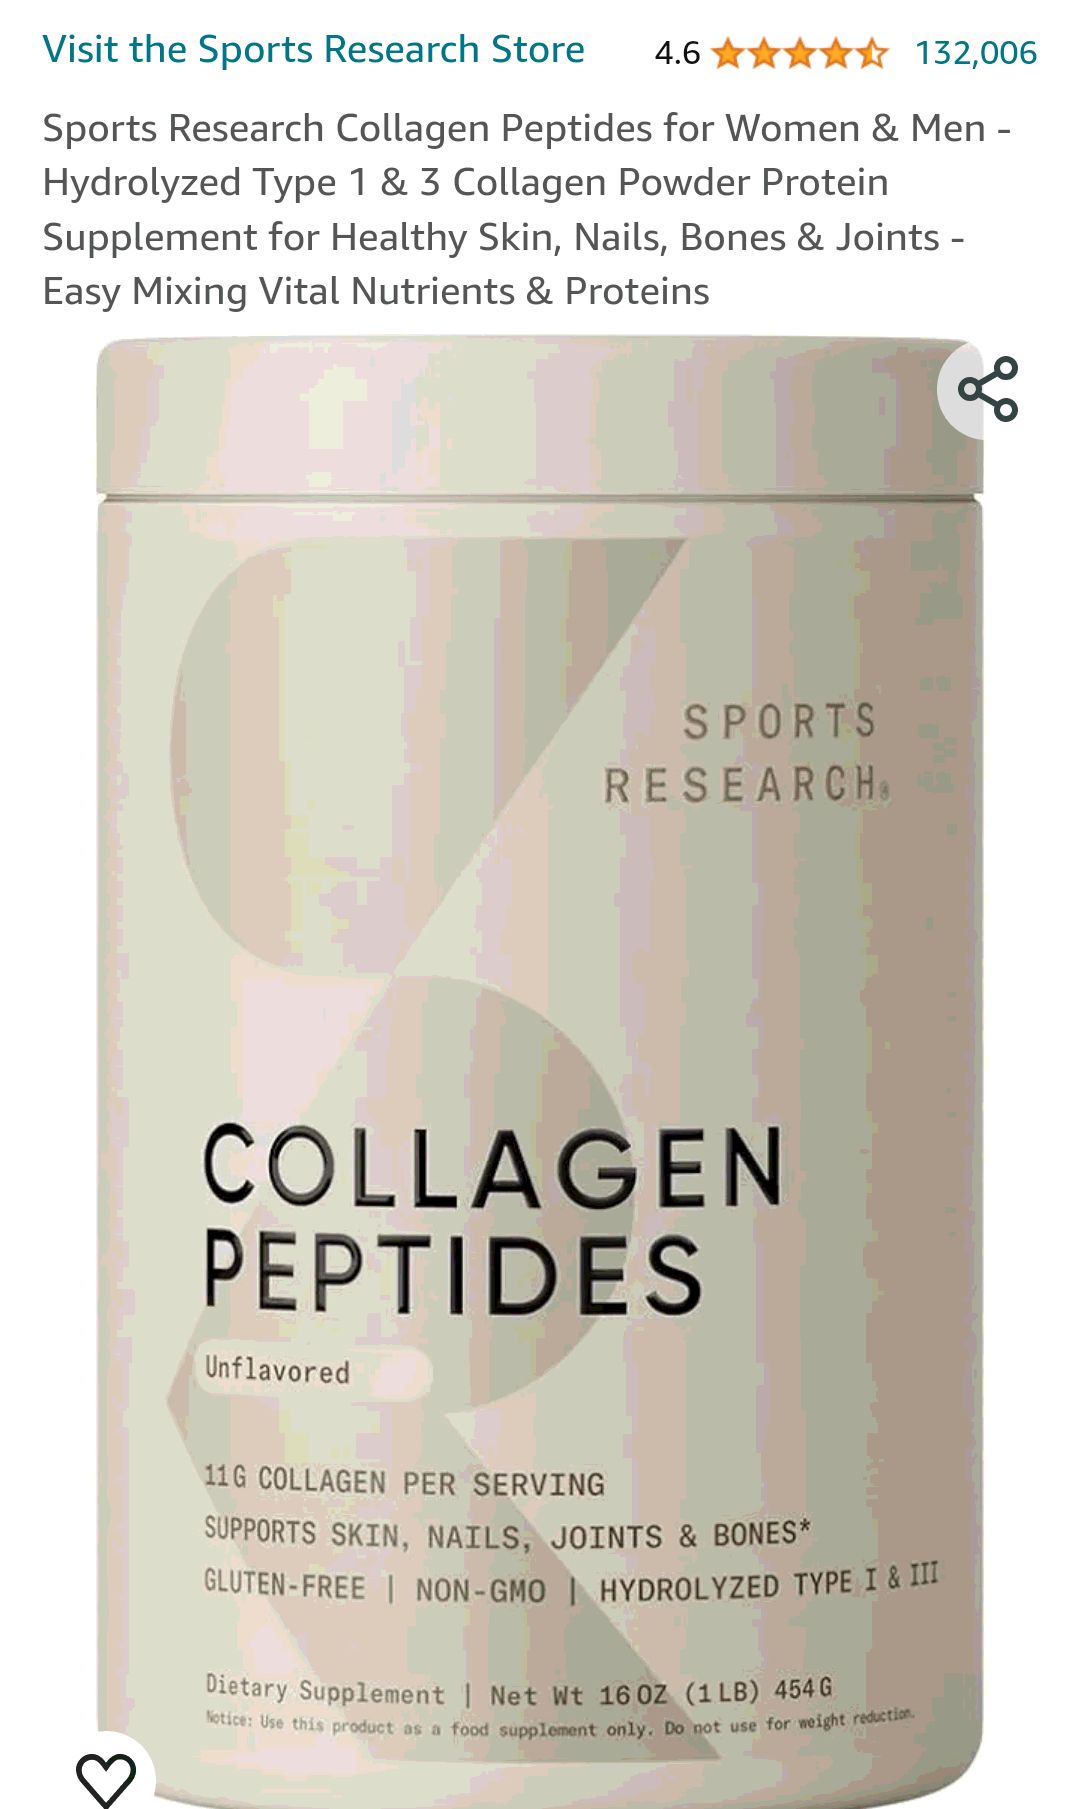 Sports Research Collagen Peptides for Women & Men - Hydrolyzed Type 1 & 3 Collagen Powder Protein Supplement for Healthy Skin, Nails, Bones & Joints - Easy Mixing Vital Nutrients & Proteins : Health &